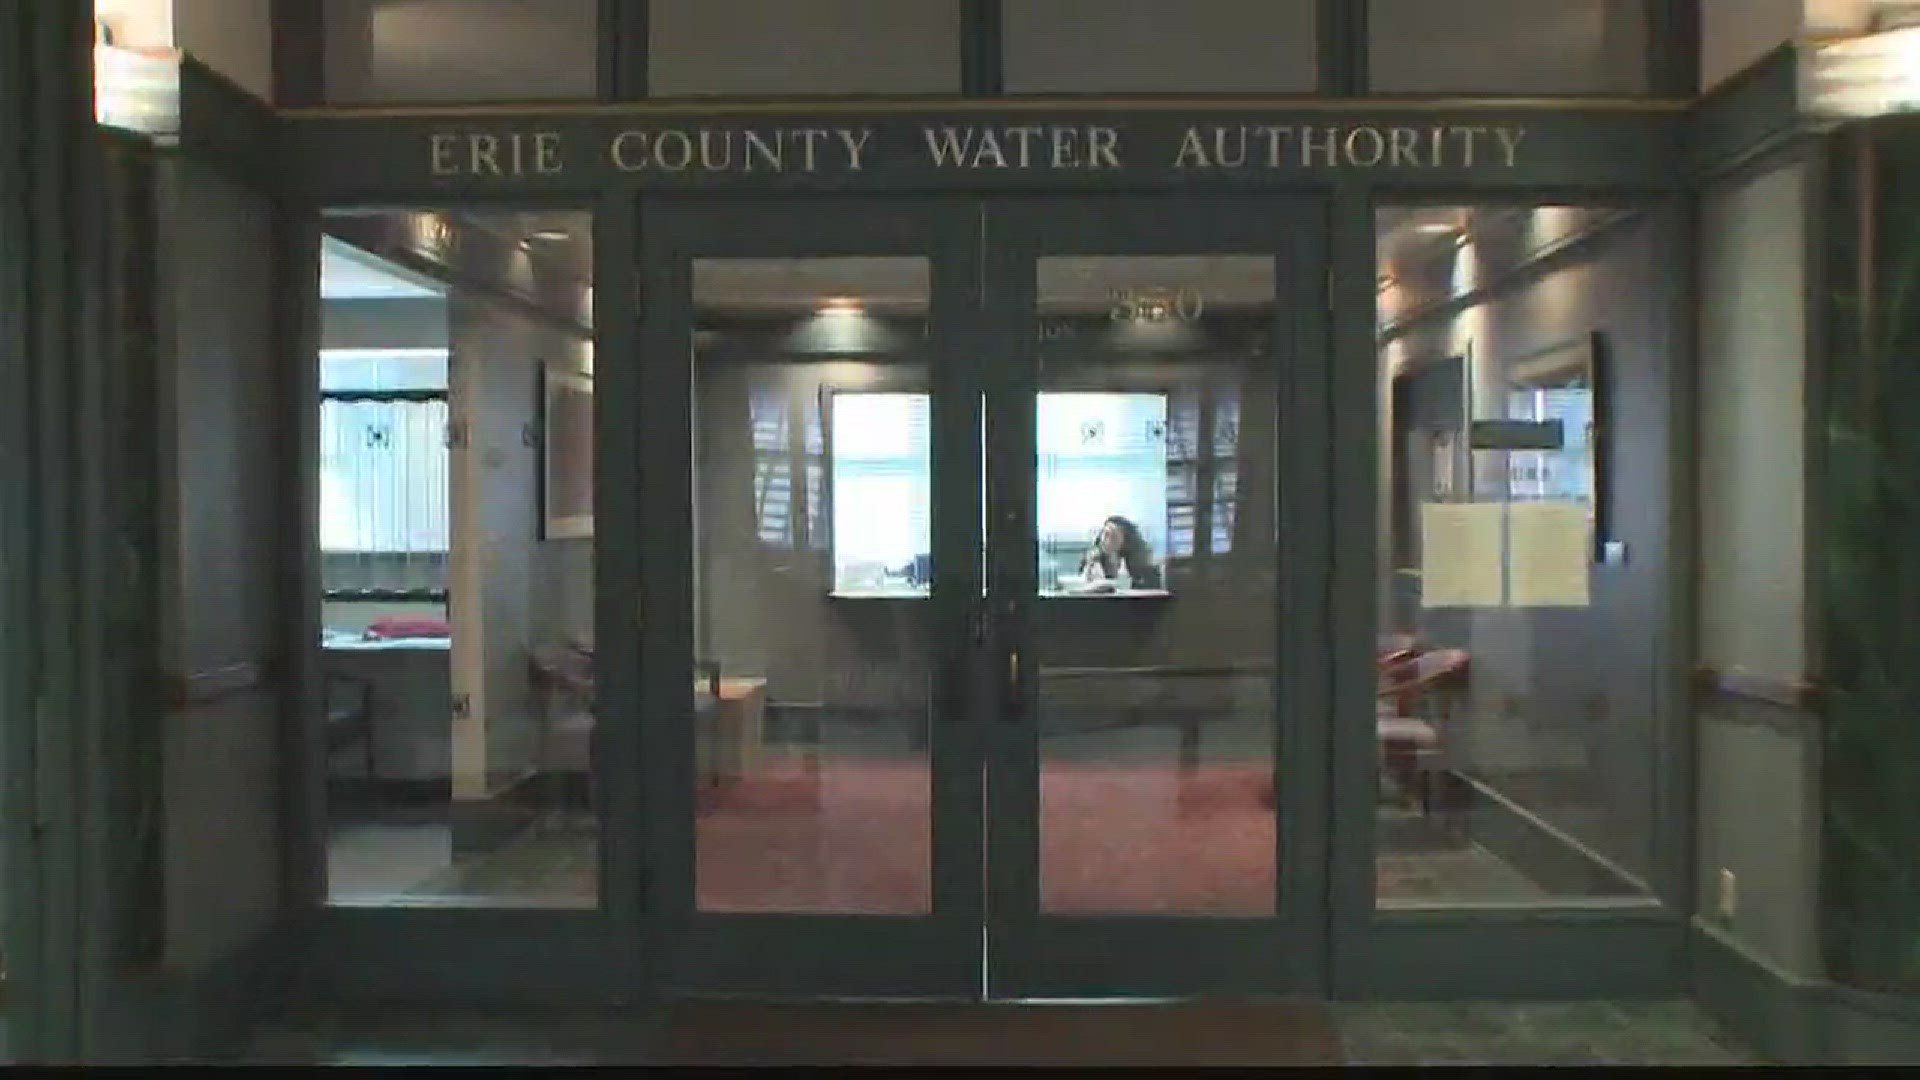 $130K Legal Tab For Erie Co. Water Authority